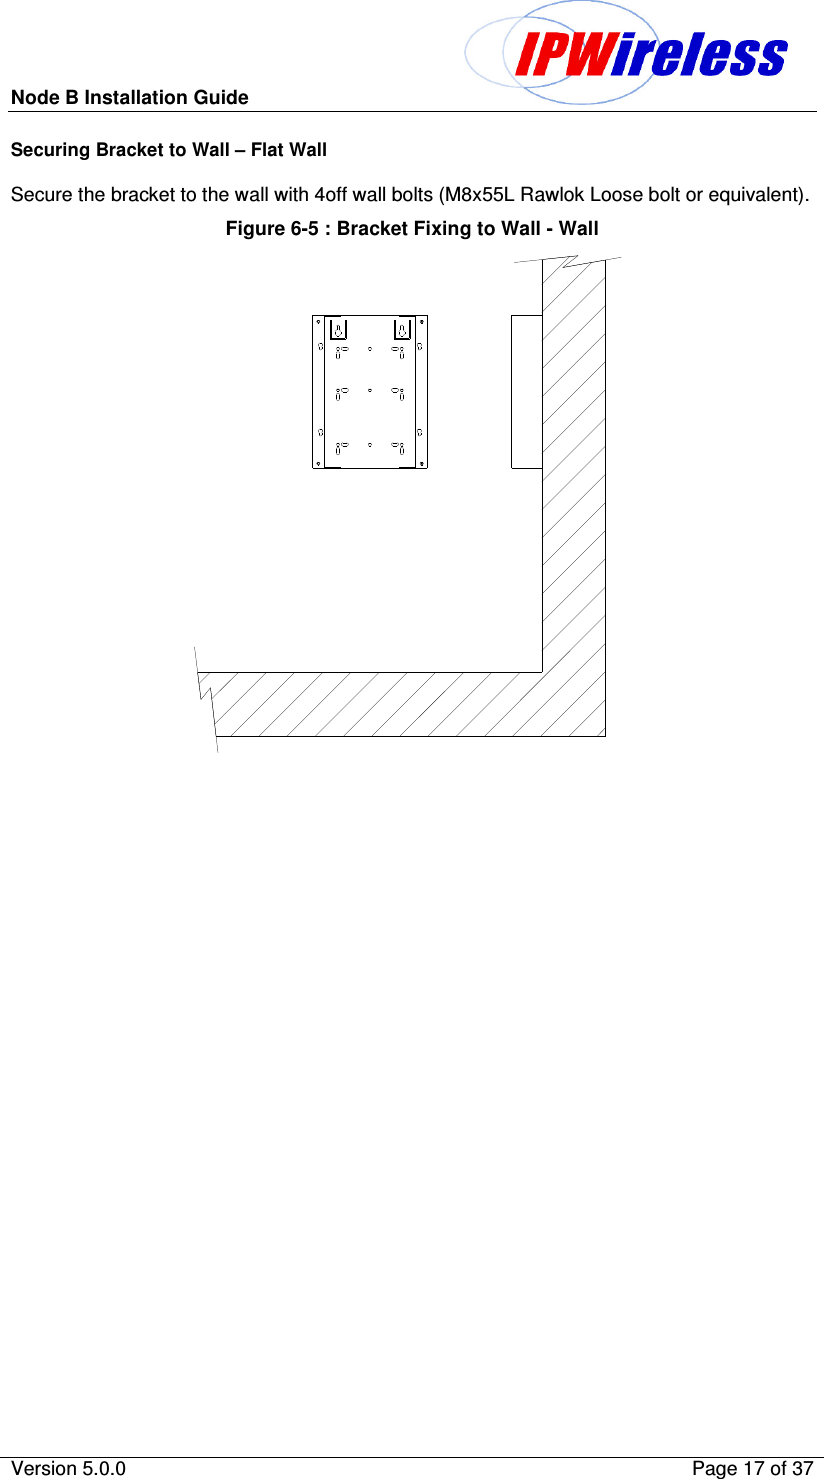 Node B Installation Guide                                              Version 5.0.0    Page 17 of 37  Securing Bracket to Wall – Flat Wall  Secure the bracket to the wall with 4off wall bolts (M8x55L Rawlok Loose bolt or equivalent). Figure 6-5 : Bracket Fixing to Wall - Wall  